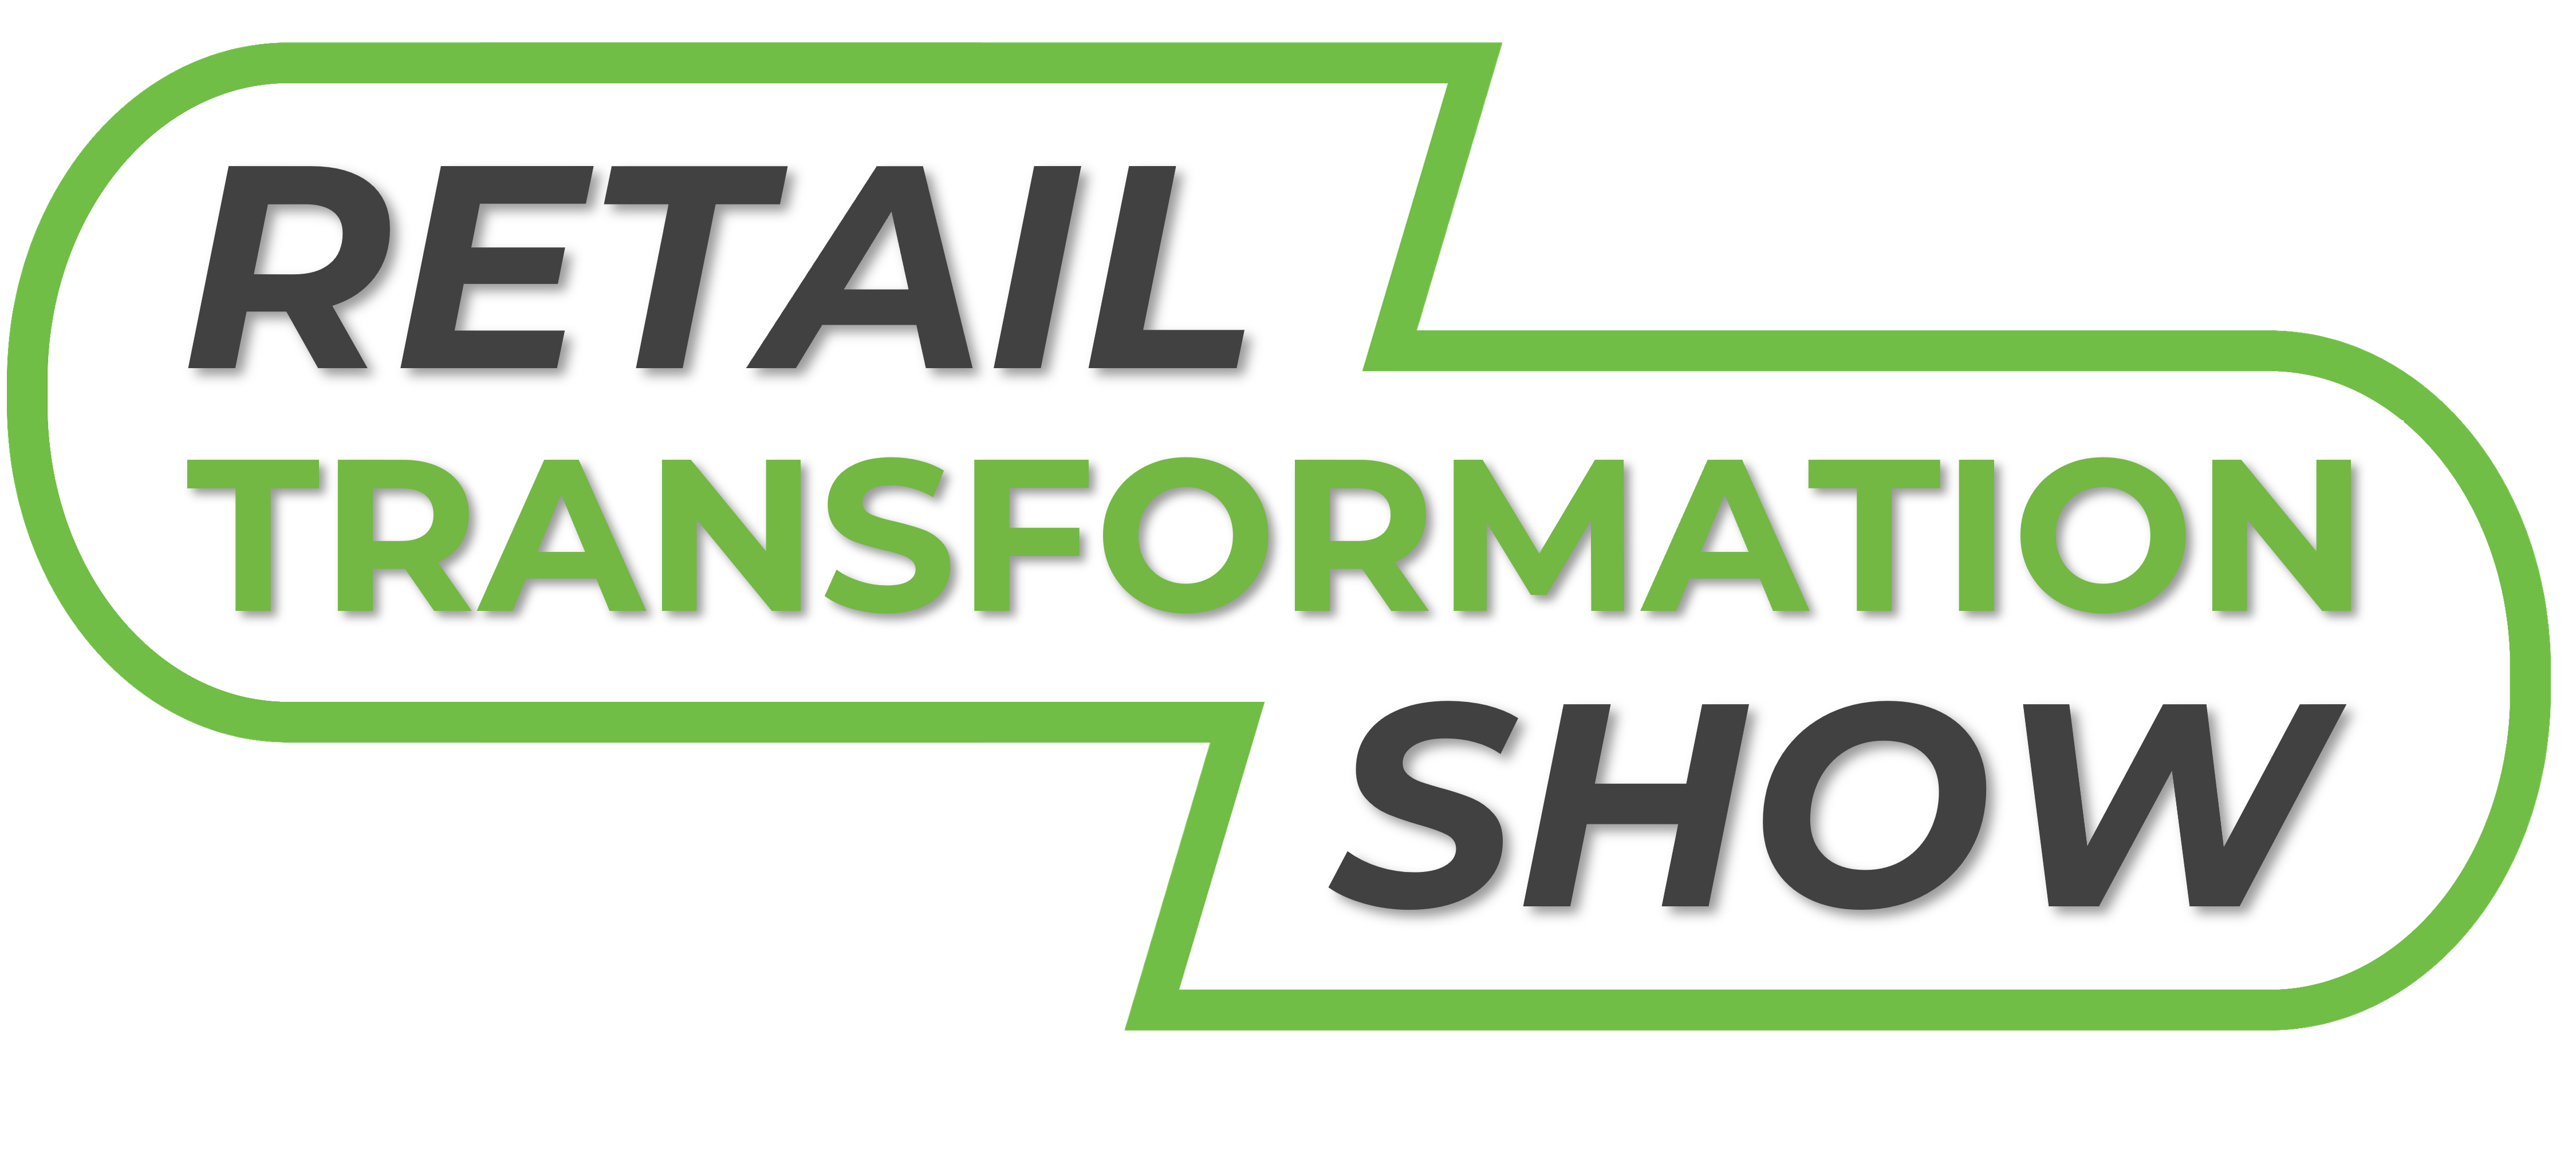 The Retail Transformation Show